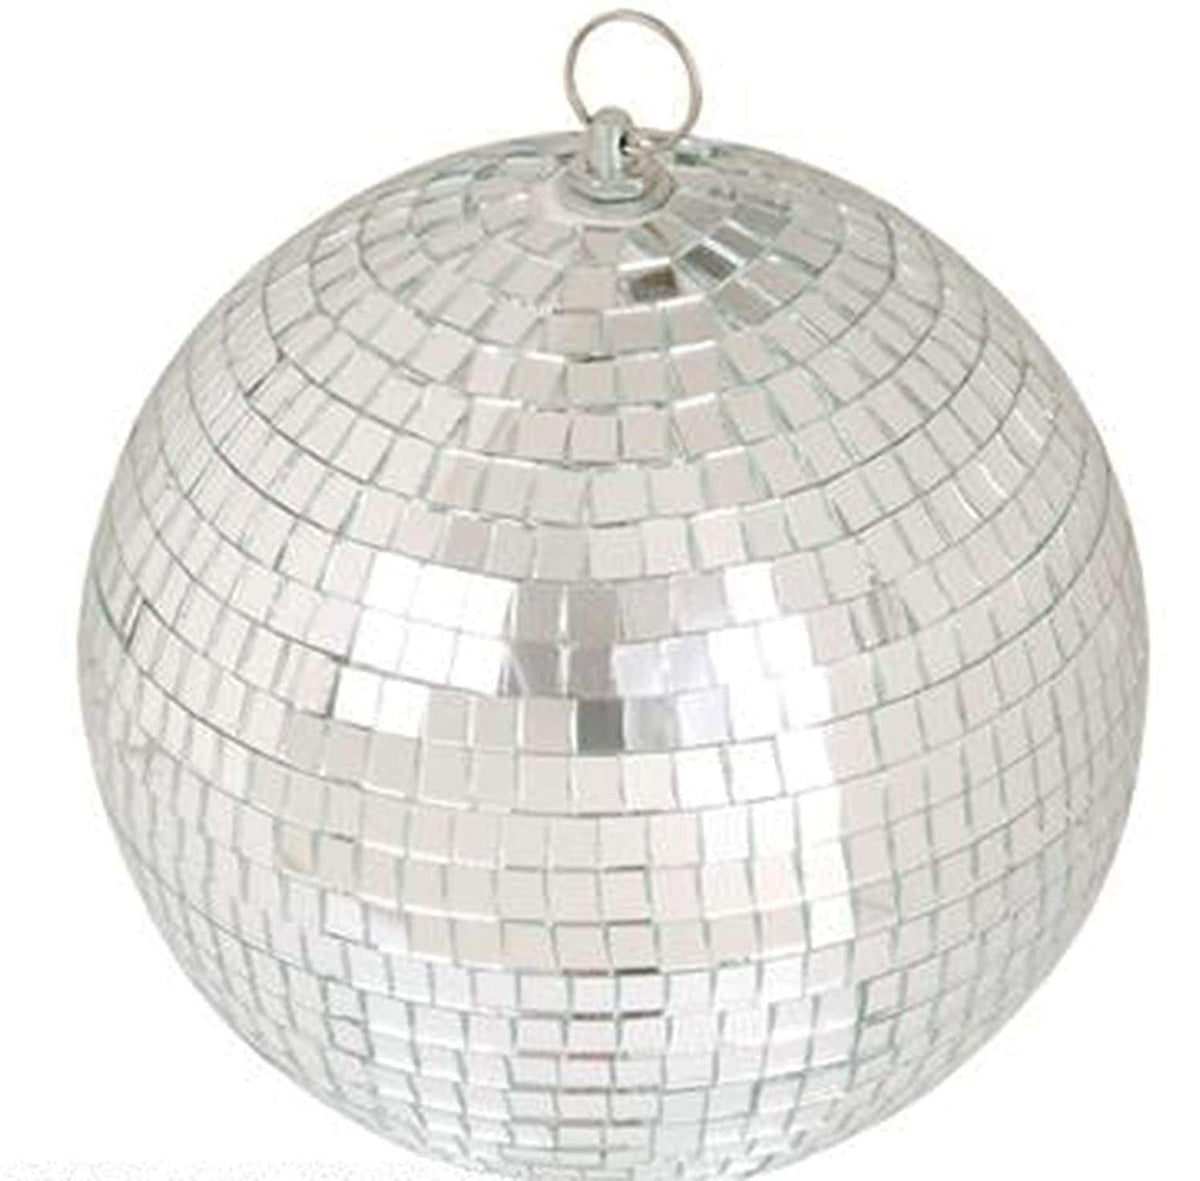 12 Pack Disco Ball Mirror Ball with Hanging Ring for Fun Retro Disco Party